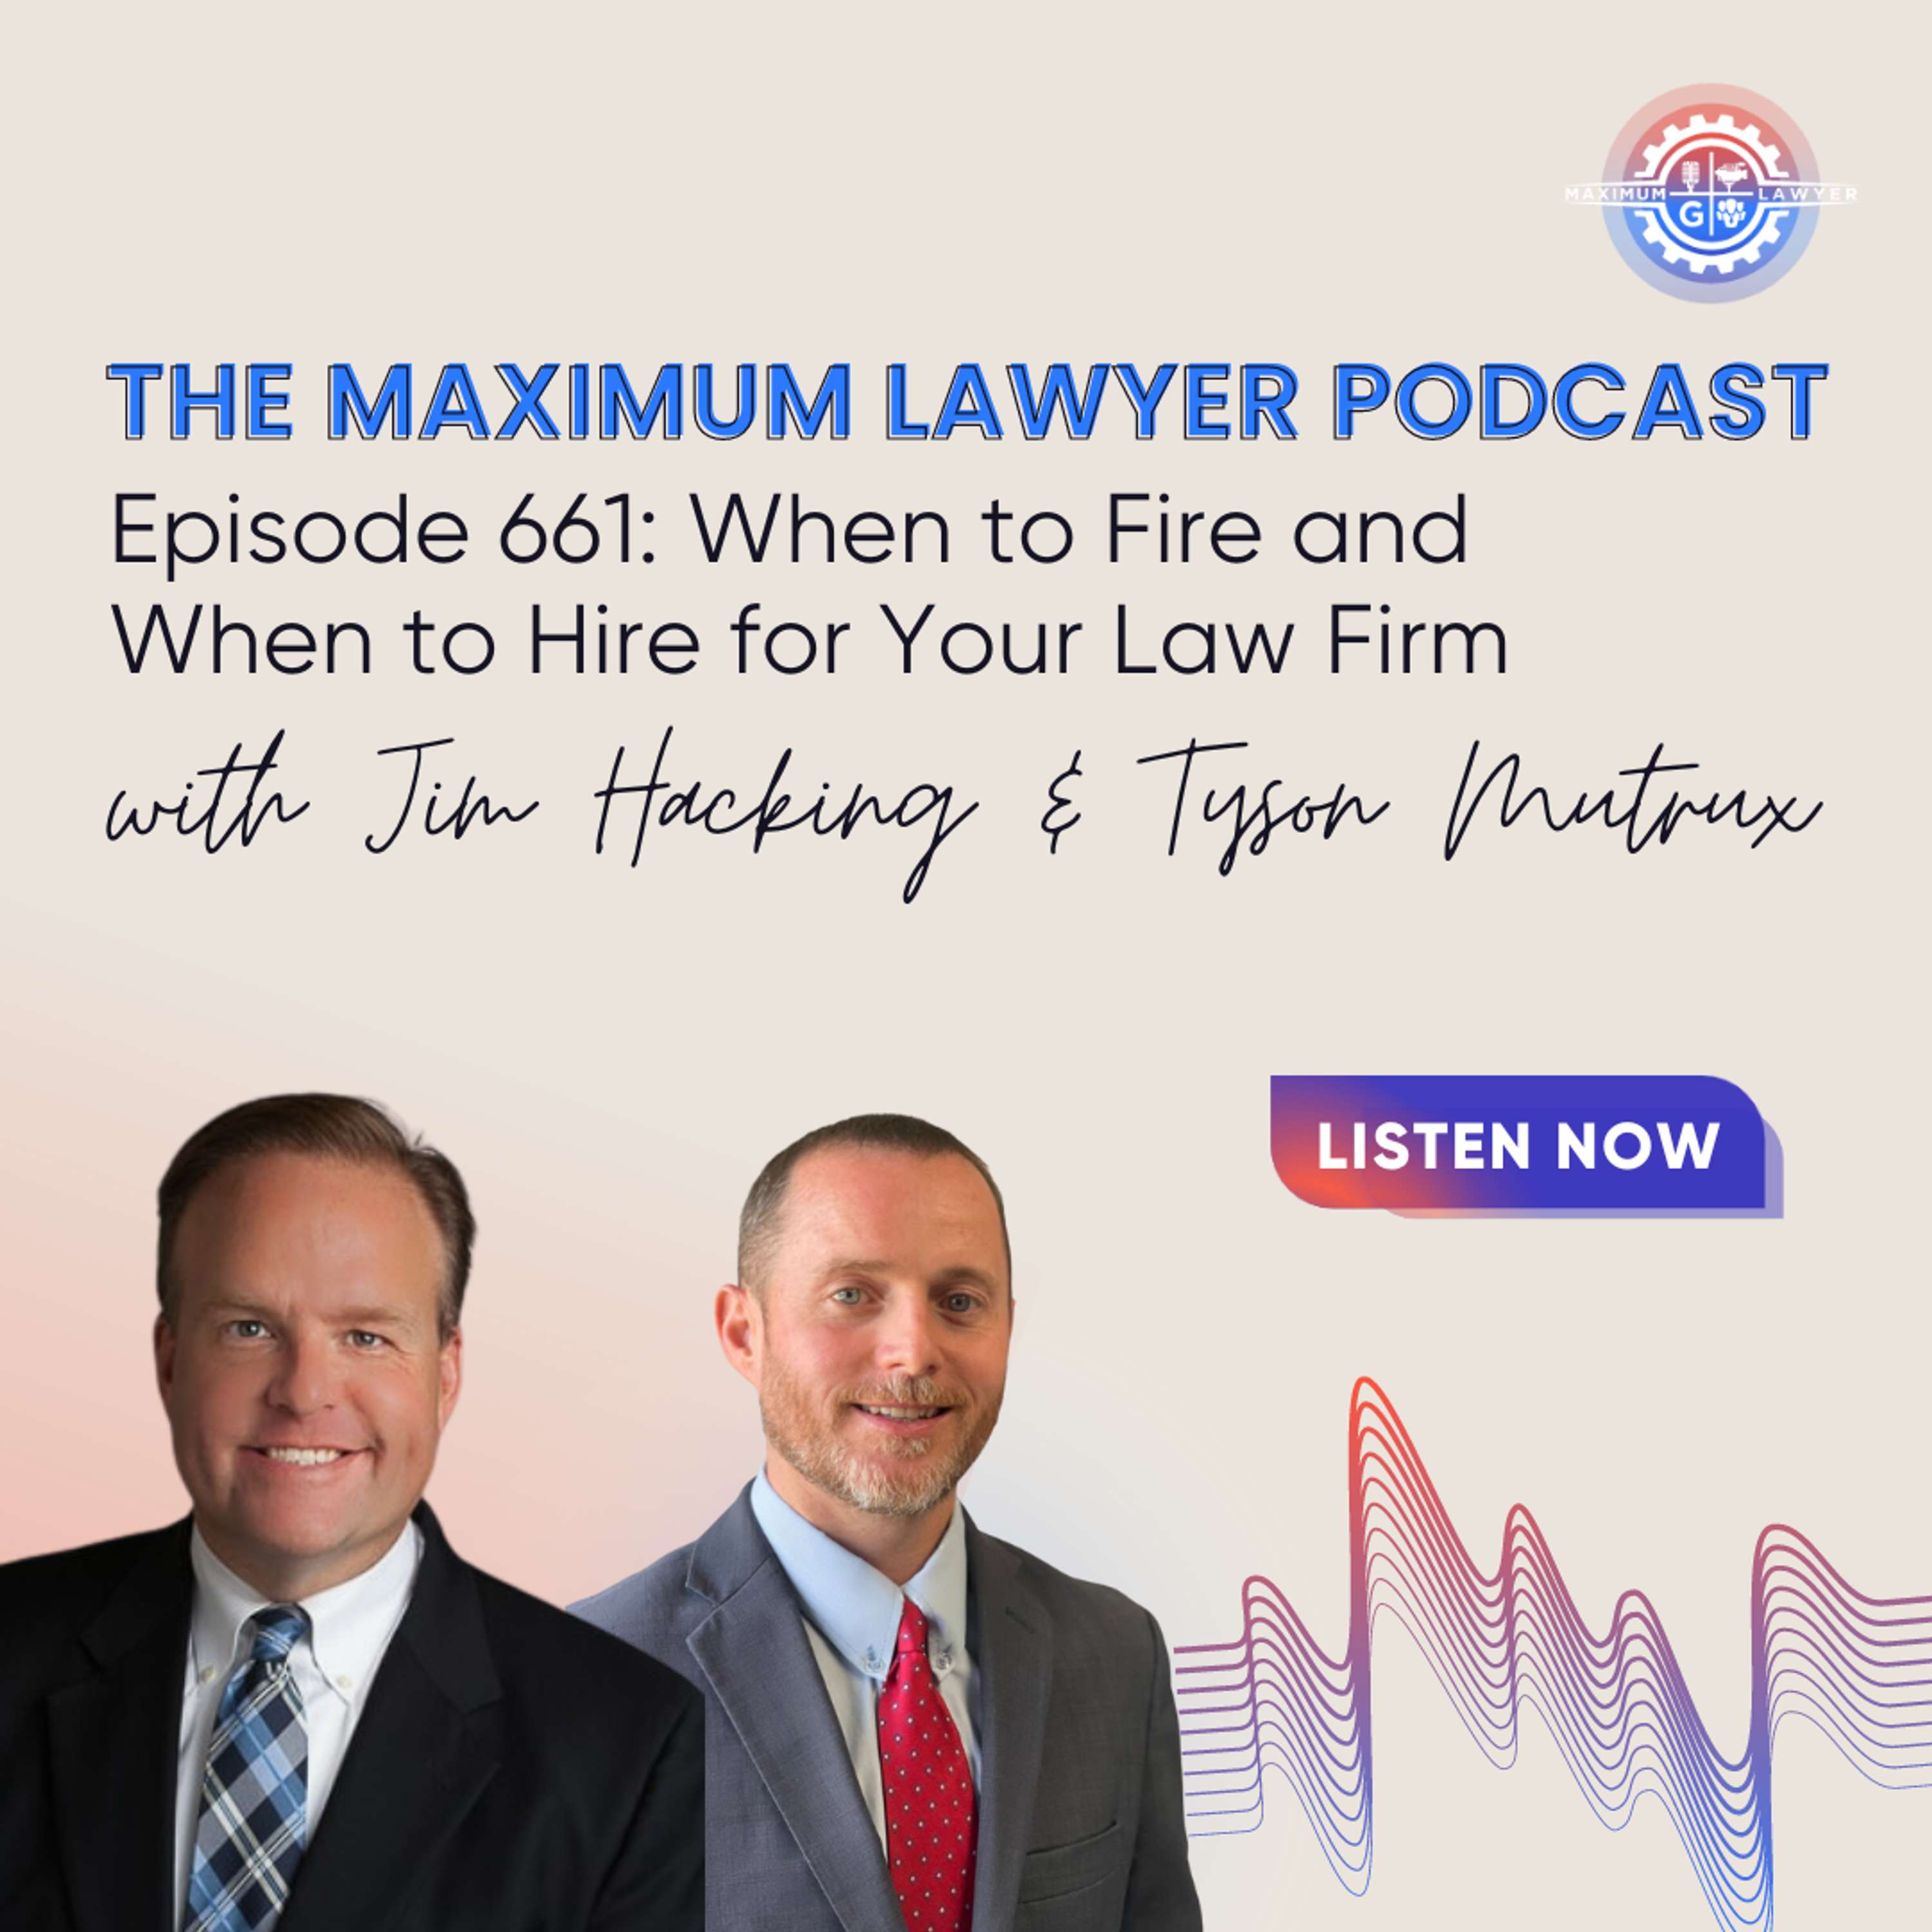 When to Fire and When to Hire for Your Law Firm with Jim and Tyson